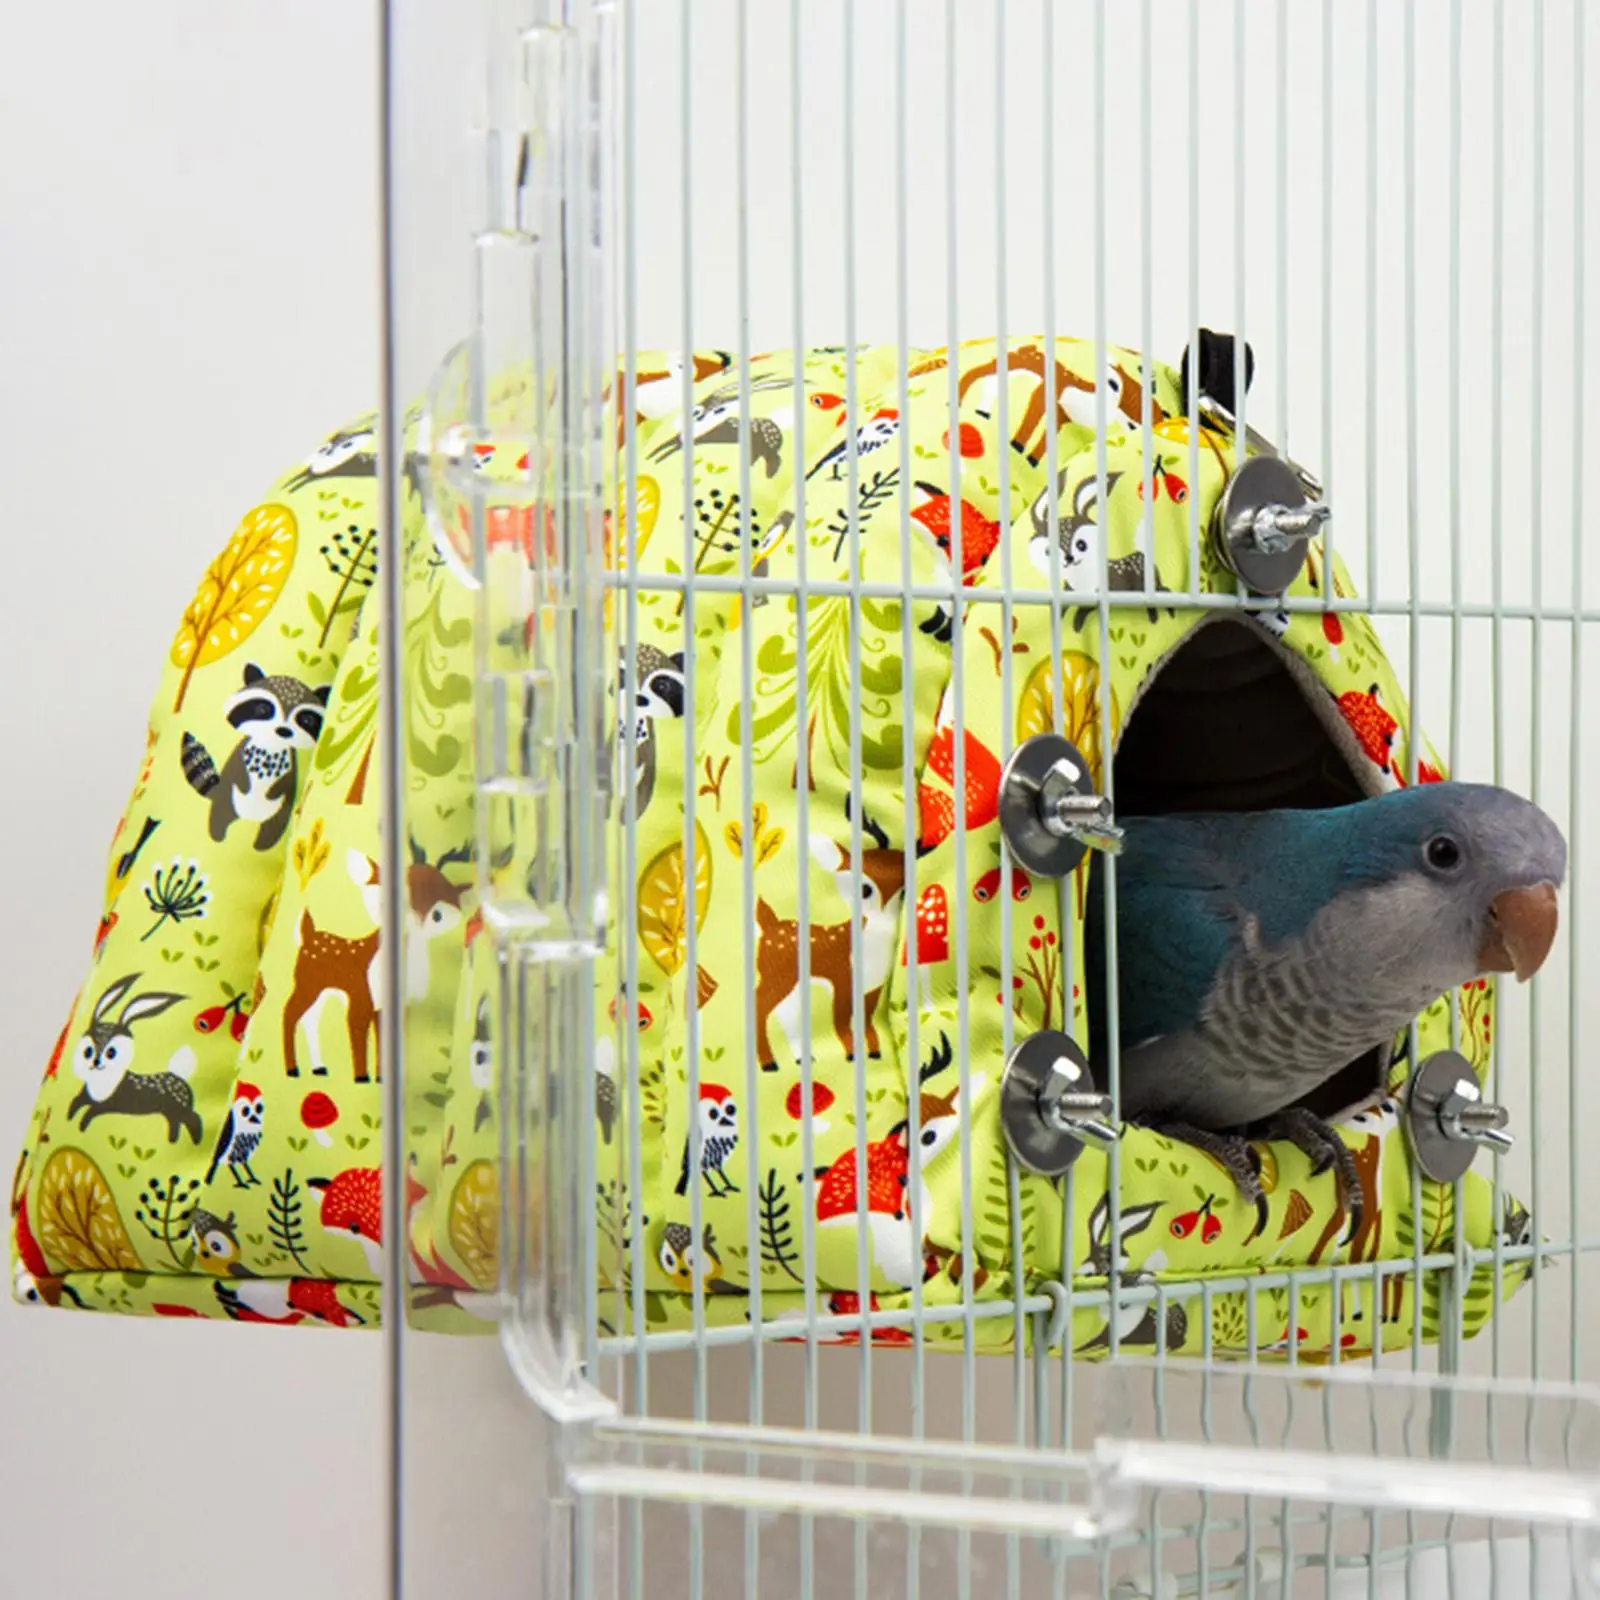 Winter Parrot Cage Hanging Hammock Parrot Shed Cage Accessory Bird Bed Thickened Bird Nest for Finches Parrot Budgies Hamster